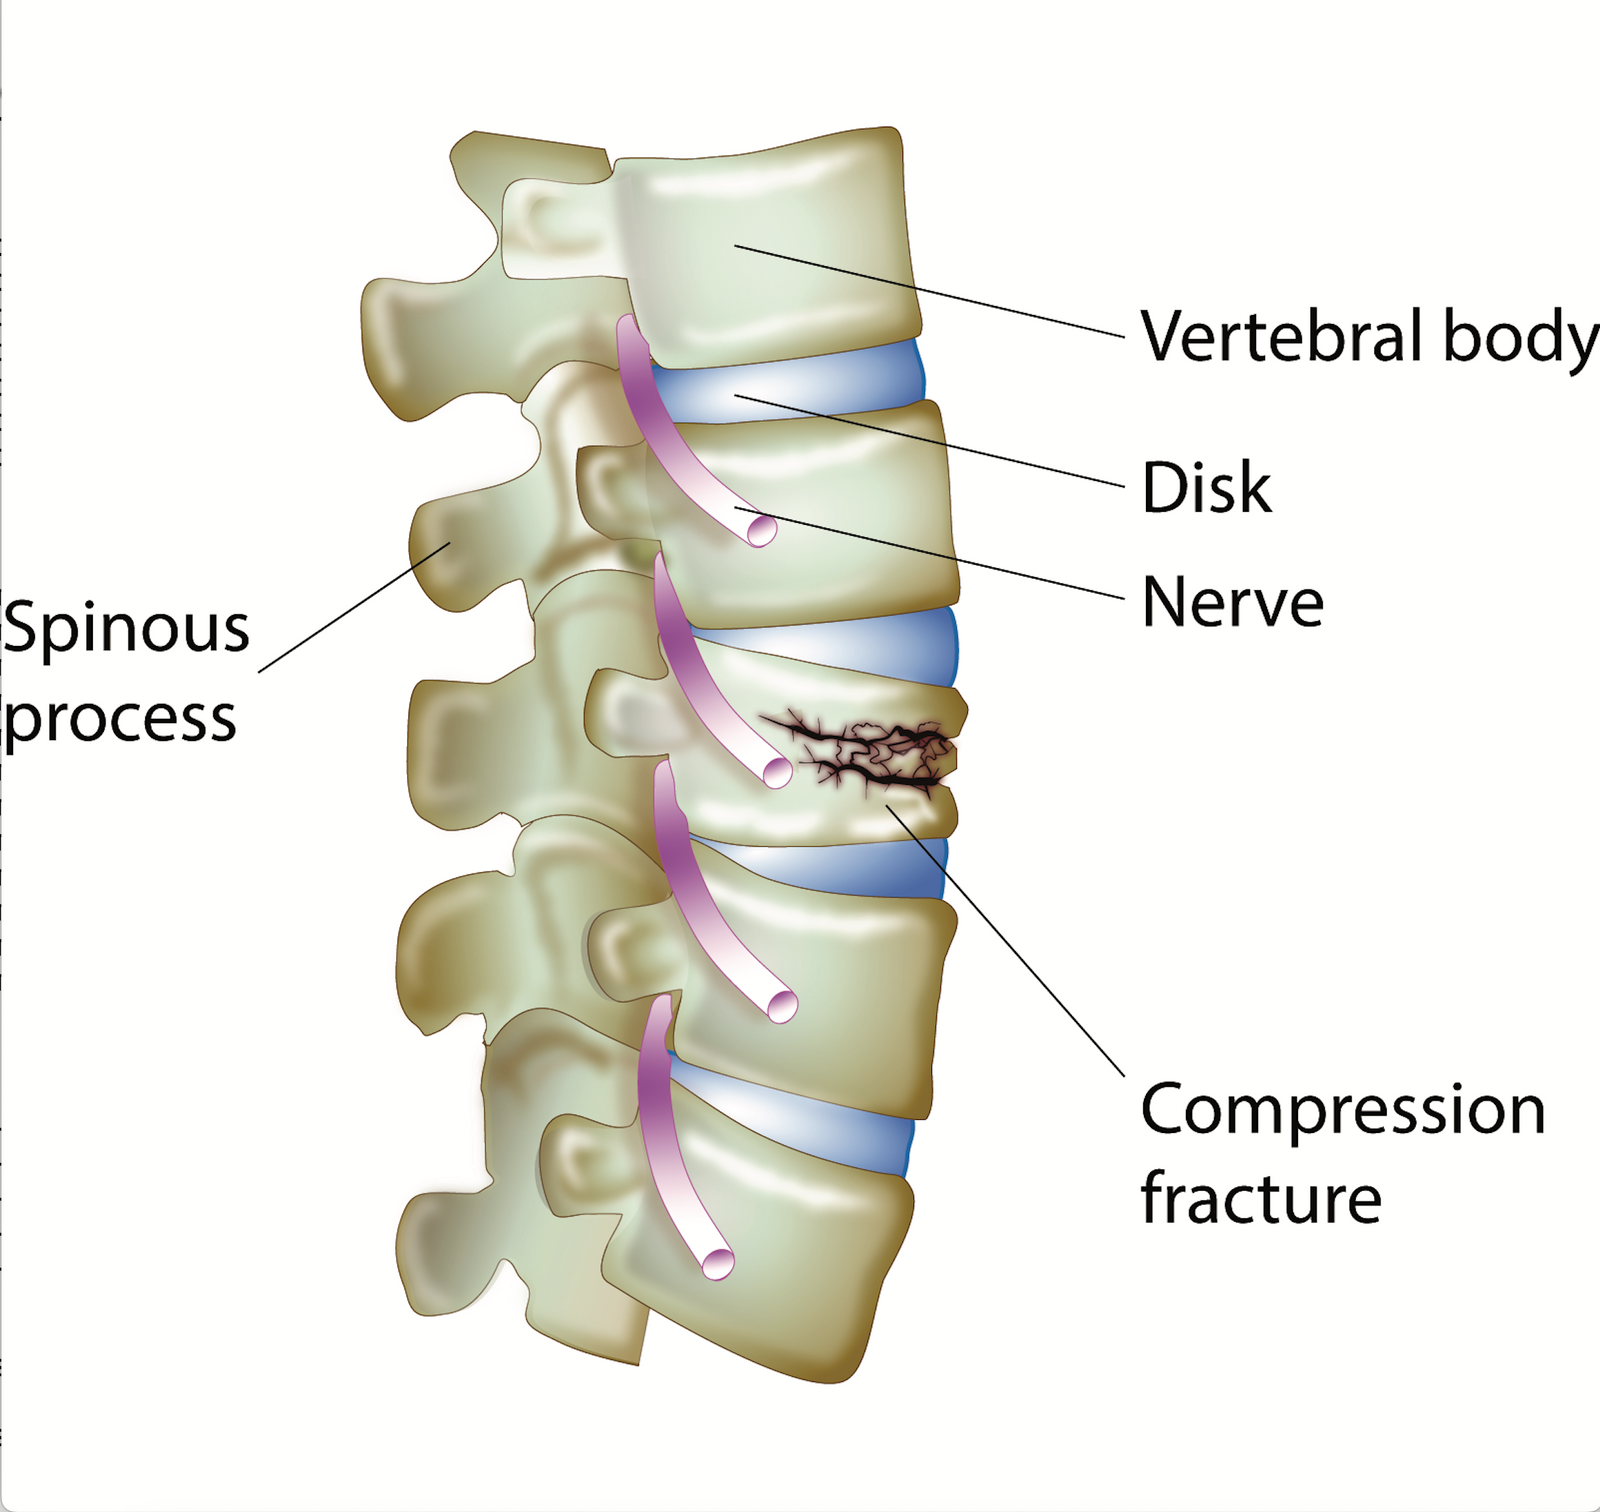 Compression Fractures of the Spine - Dr. Lani Simpson